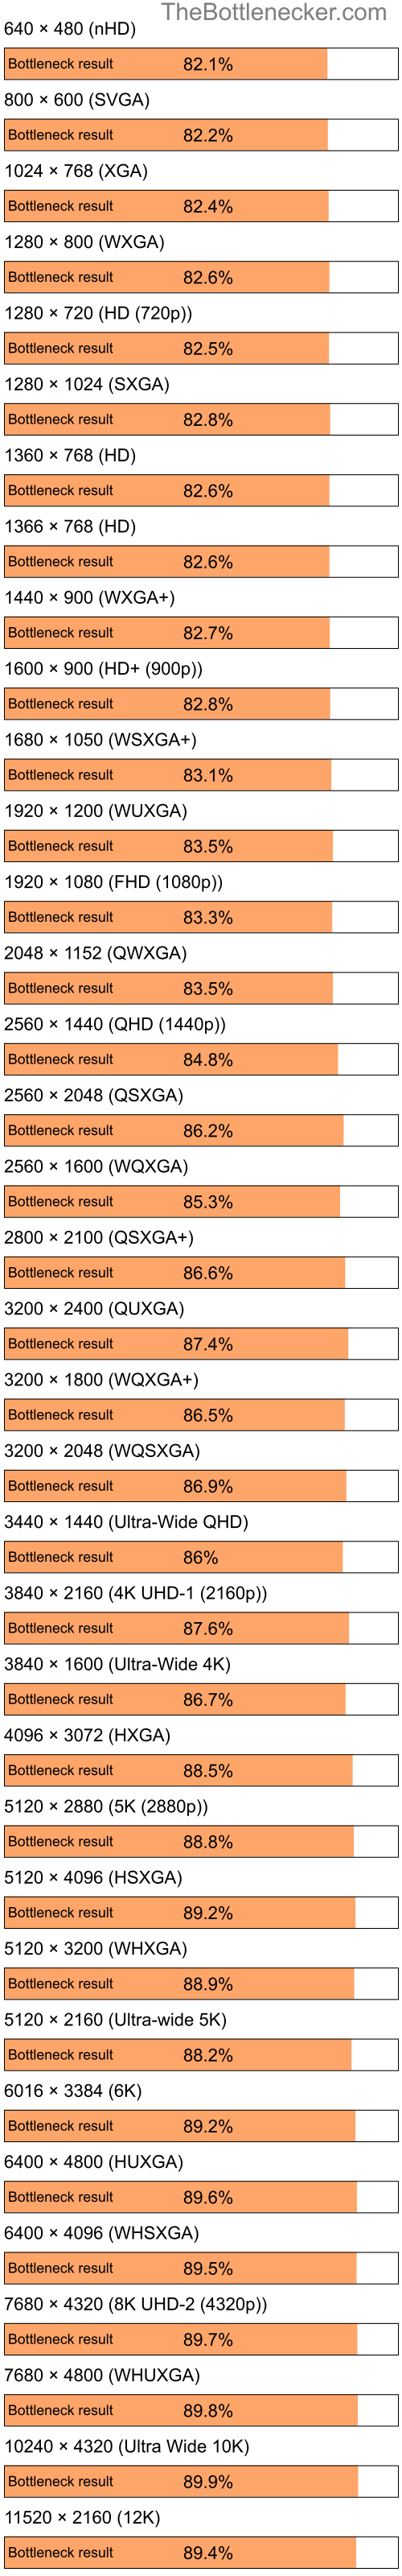 Bottleneck results by resolution for Intel Pentium 4 and NVIDIA GeForce nForce 630a in Graphic Card Intense Tasks